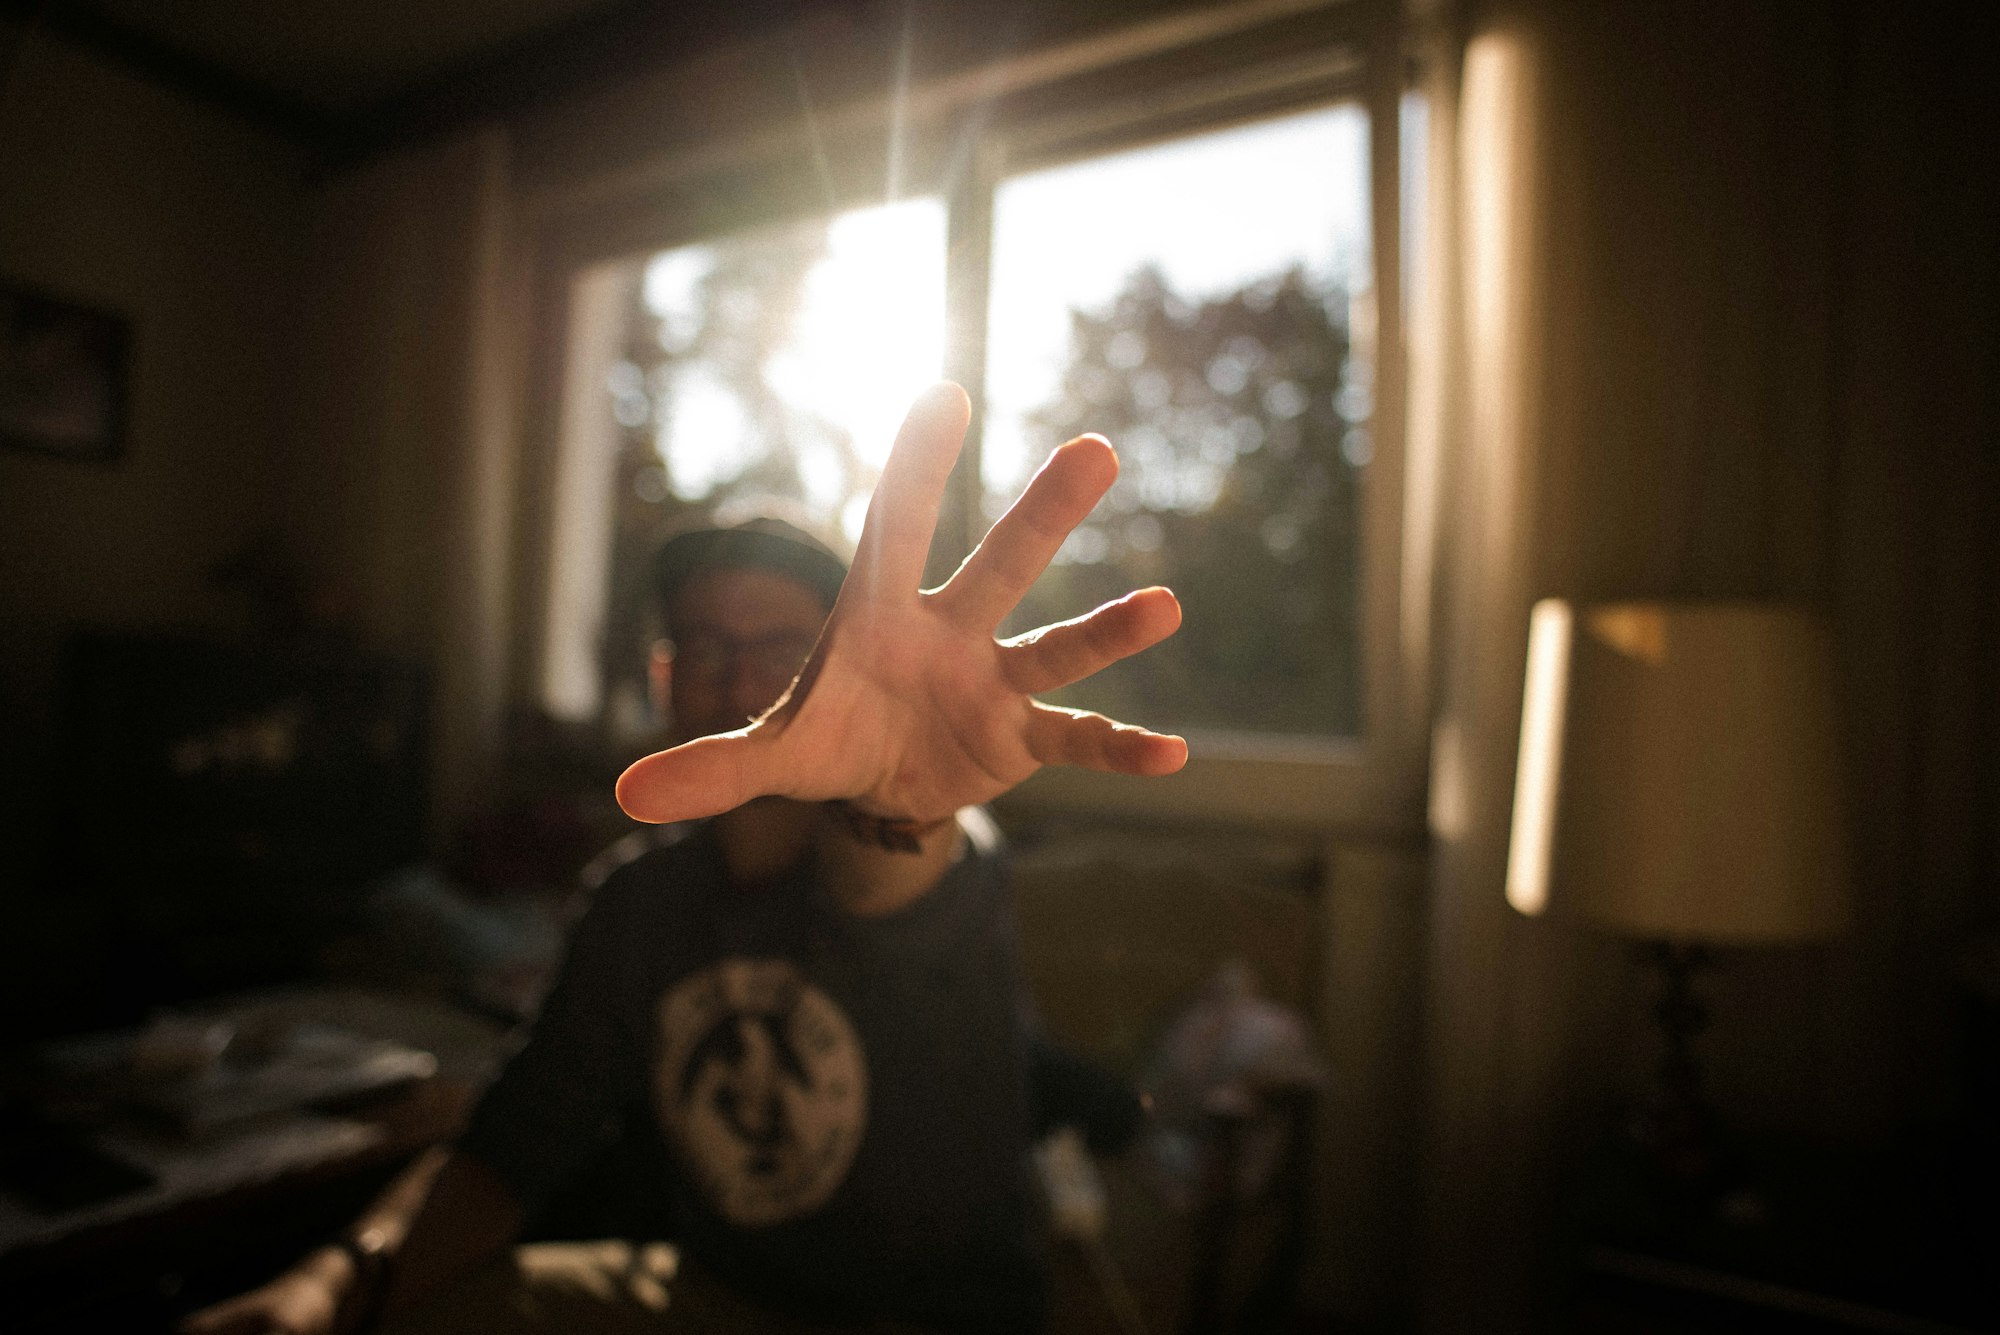 A man in a residroom holds an outstretched hand in front of the camera, with the sun appearing in a window in the background.